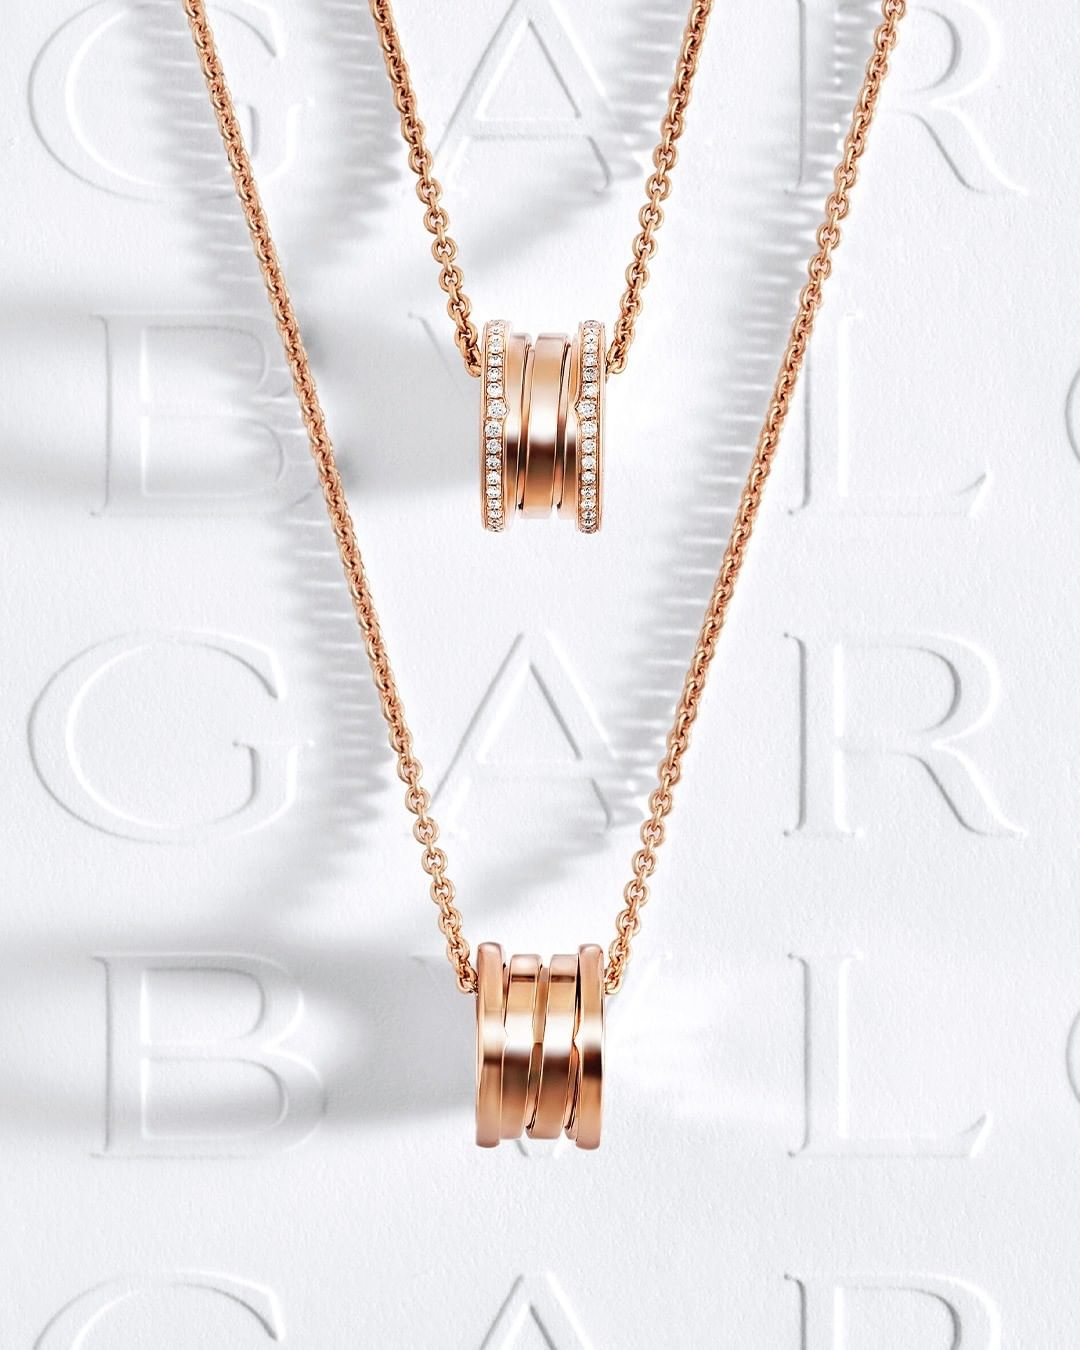 bulgari@instagram on Pinno: For whatever bold means to you. Bvlgari ...